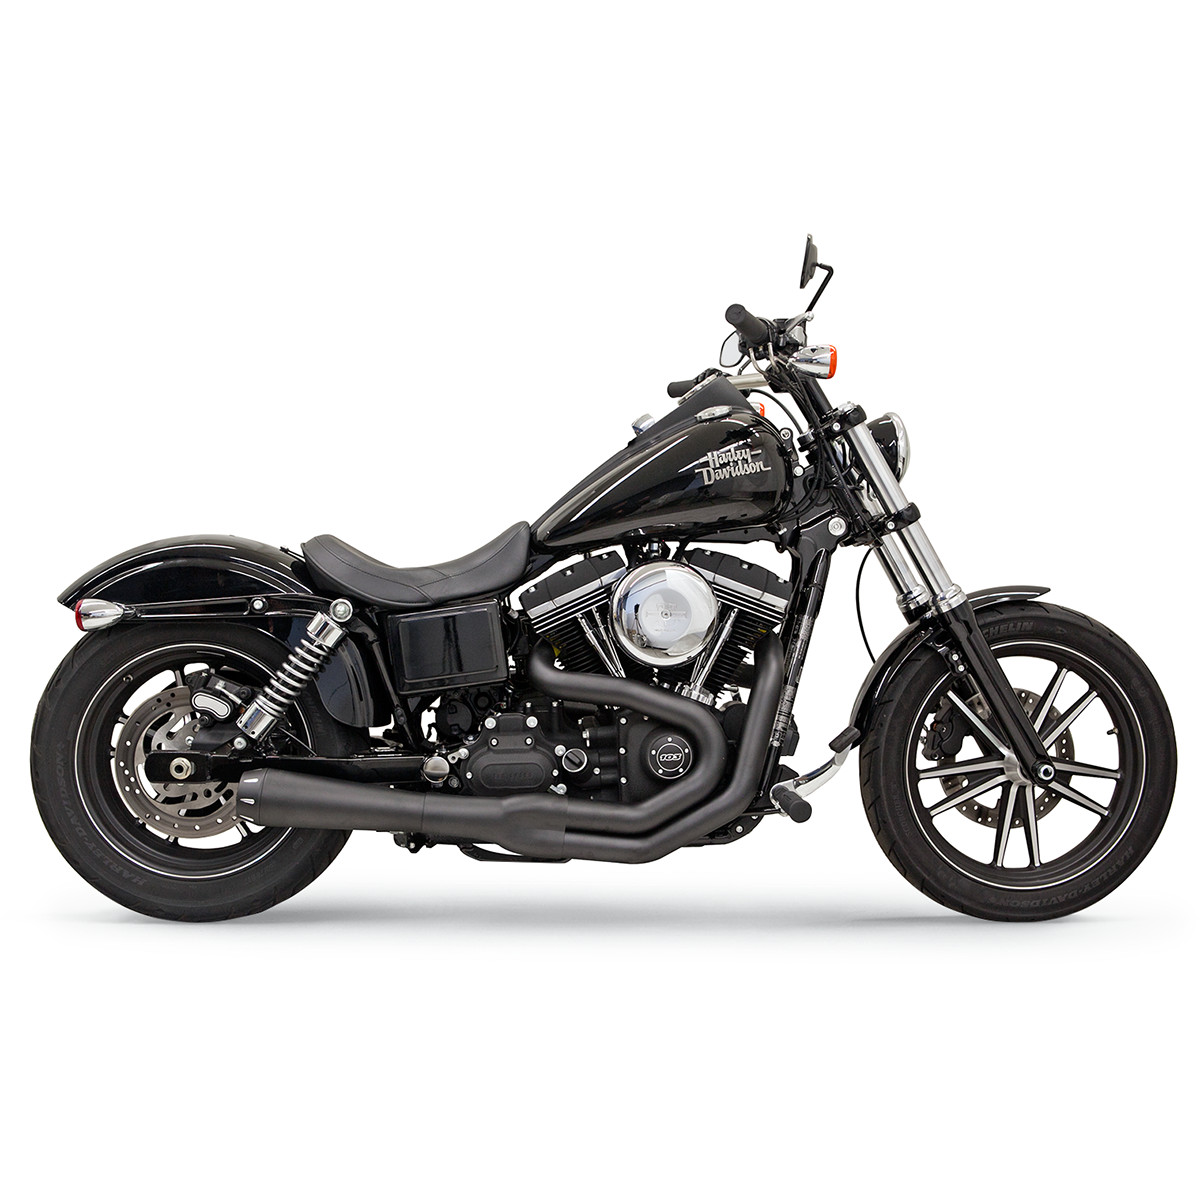 H/D FXD, FXDWG EXHAUST SYSTEM ROAD RAGE II MEGA 2-INTO-1 BLACK